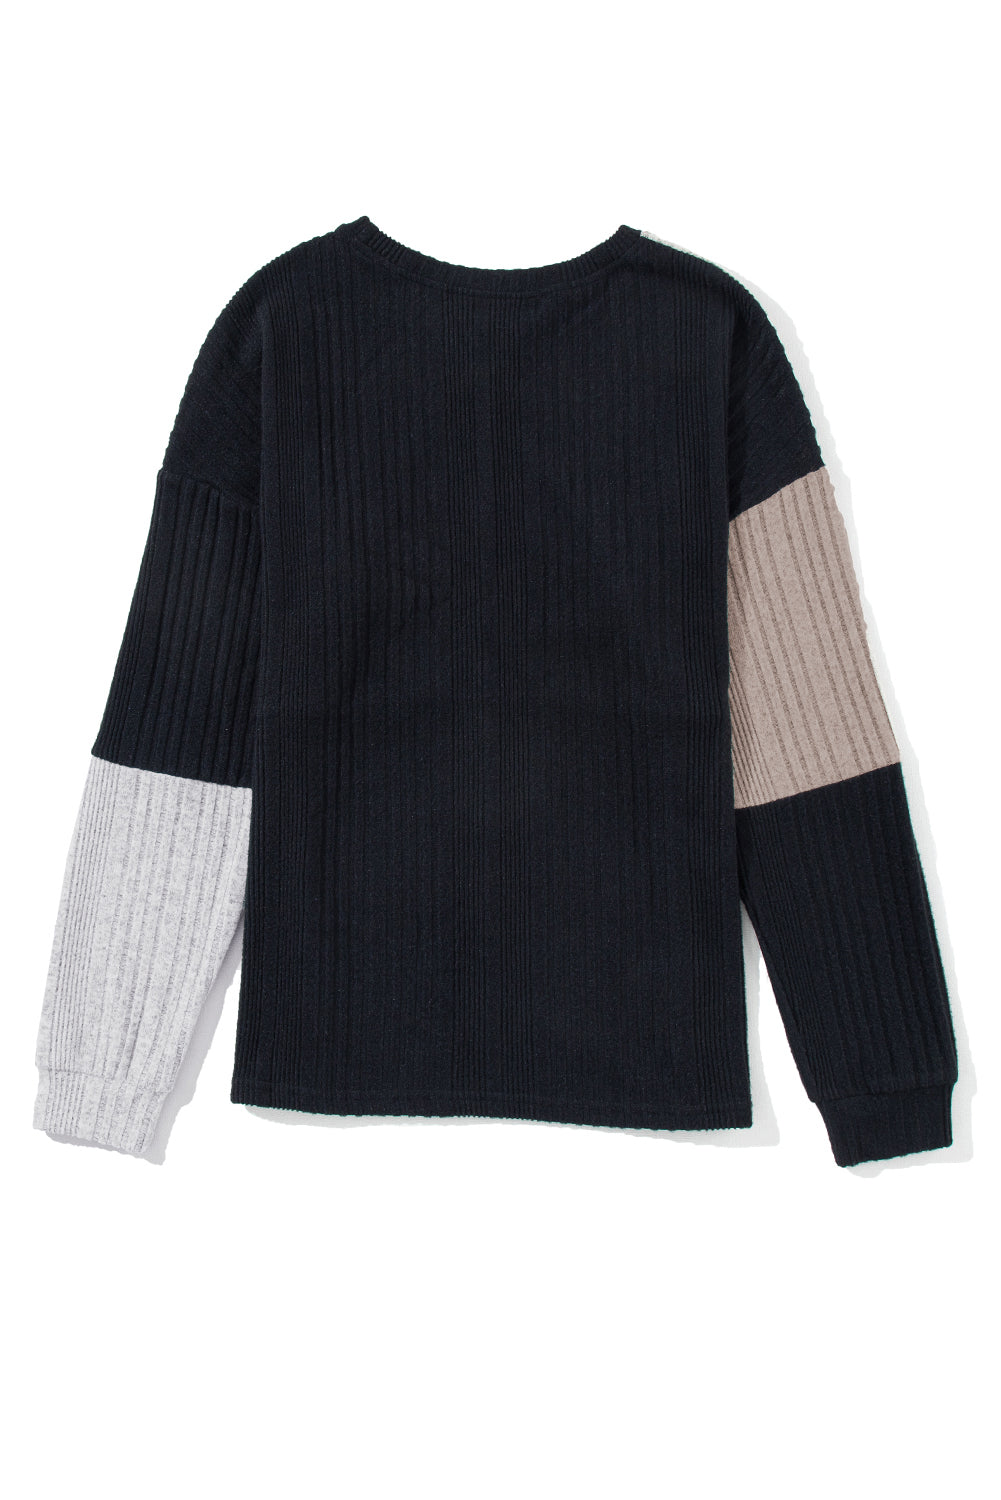 Black Colorblock Textured Knit Top - SELFTRITSS